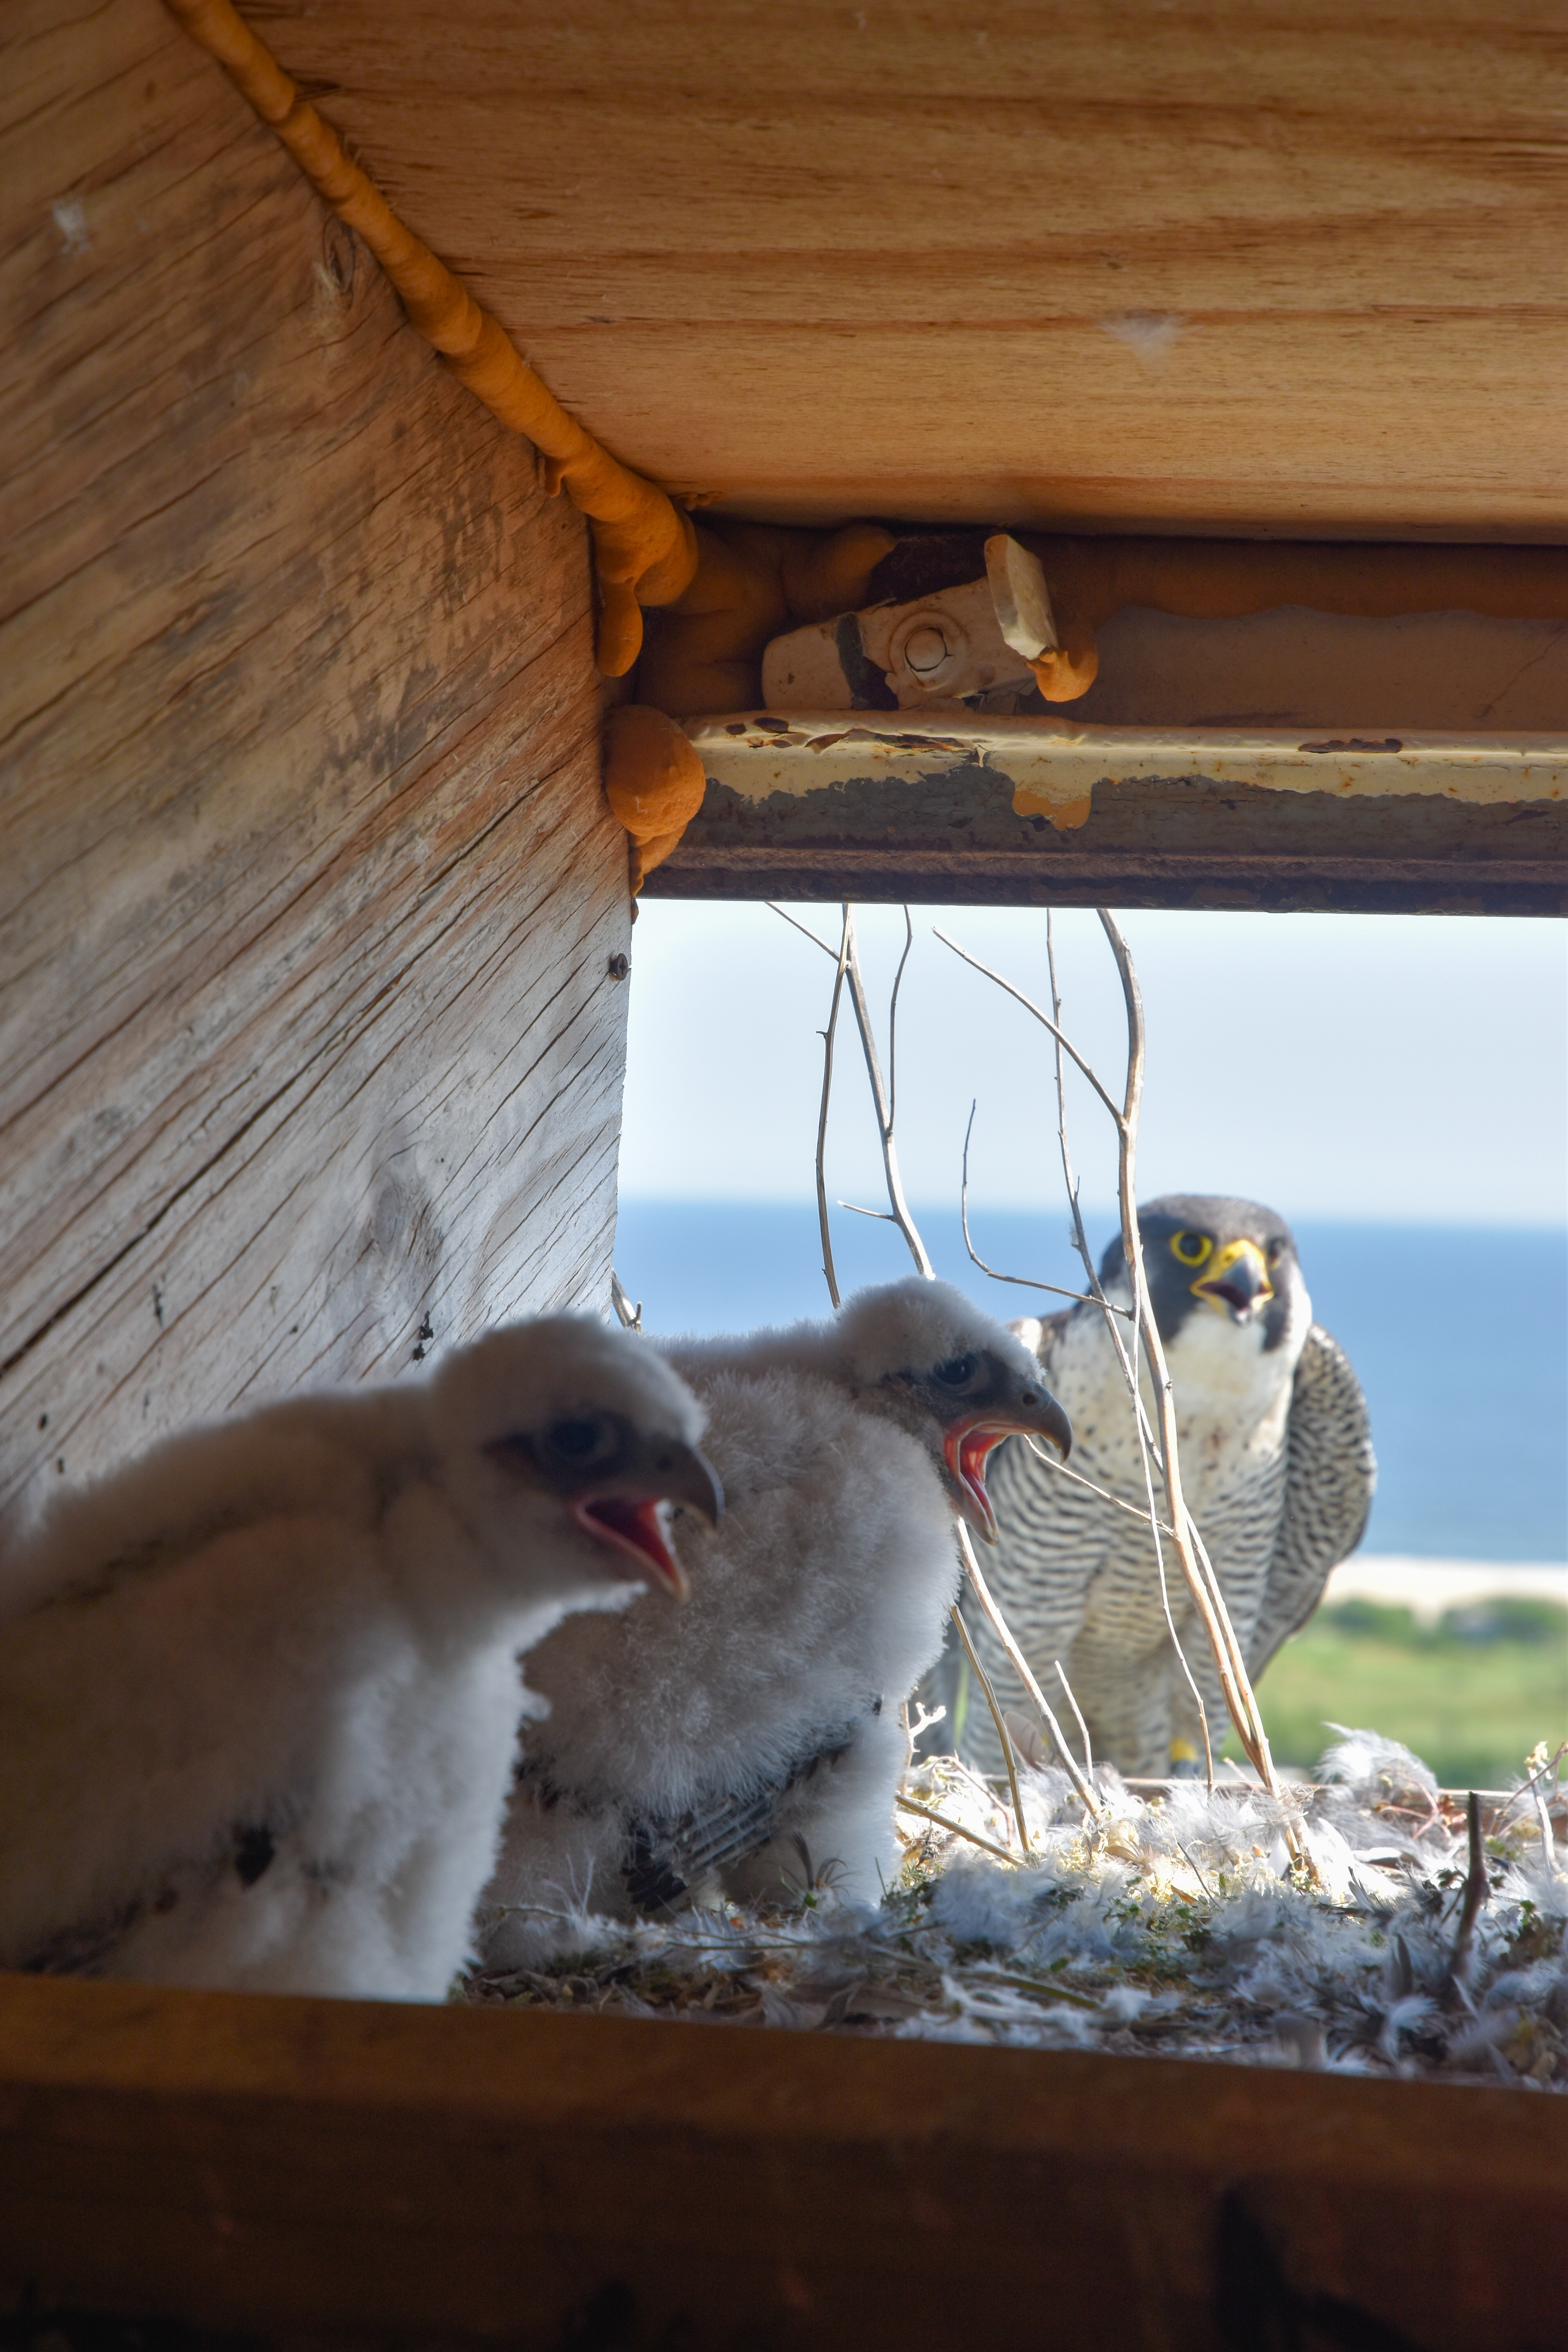 Falcon Chicks Hatch at Marine Parkway-Gil Hodges Memorial Bridge in May 2021